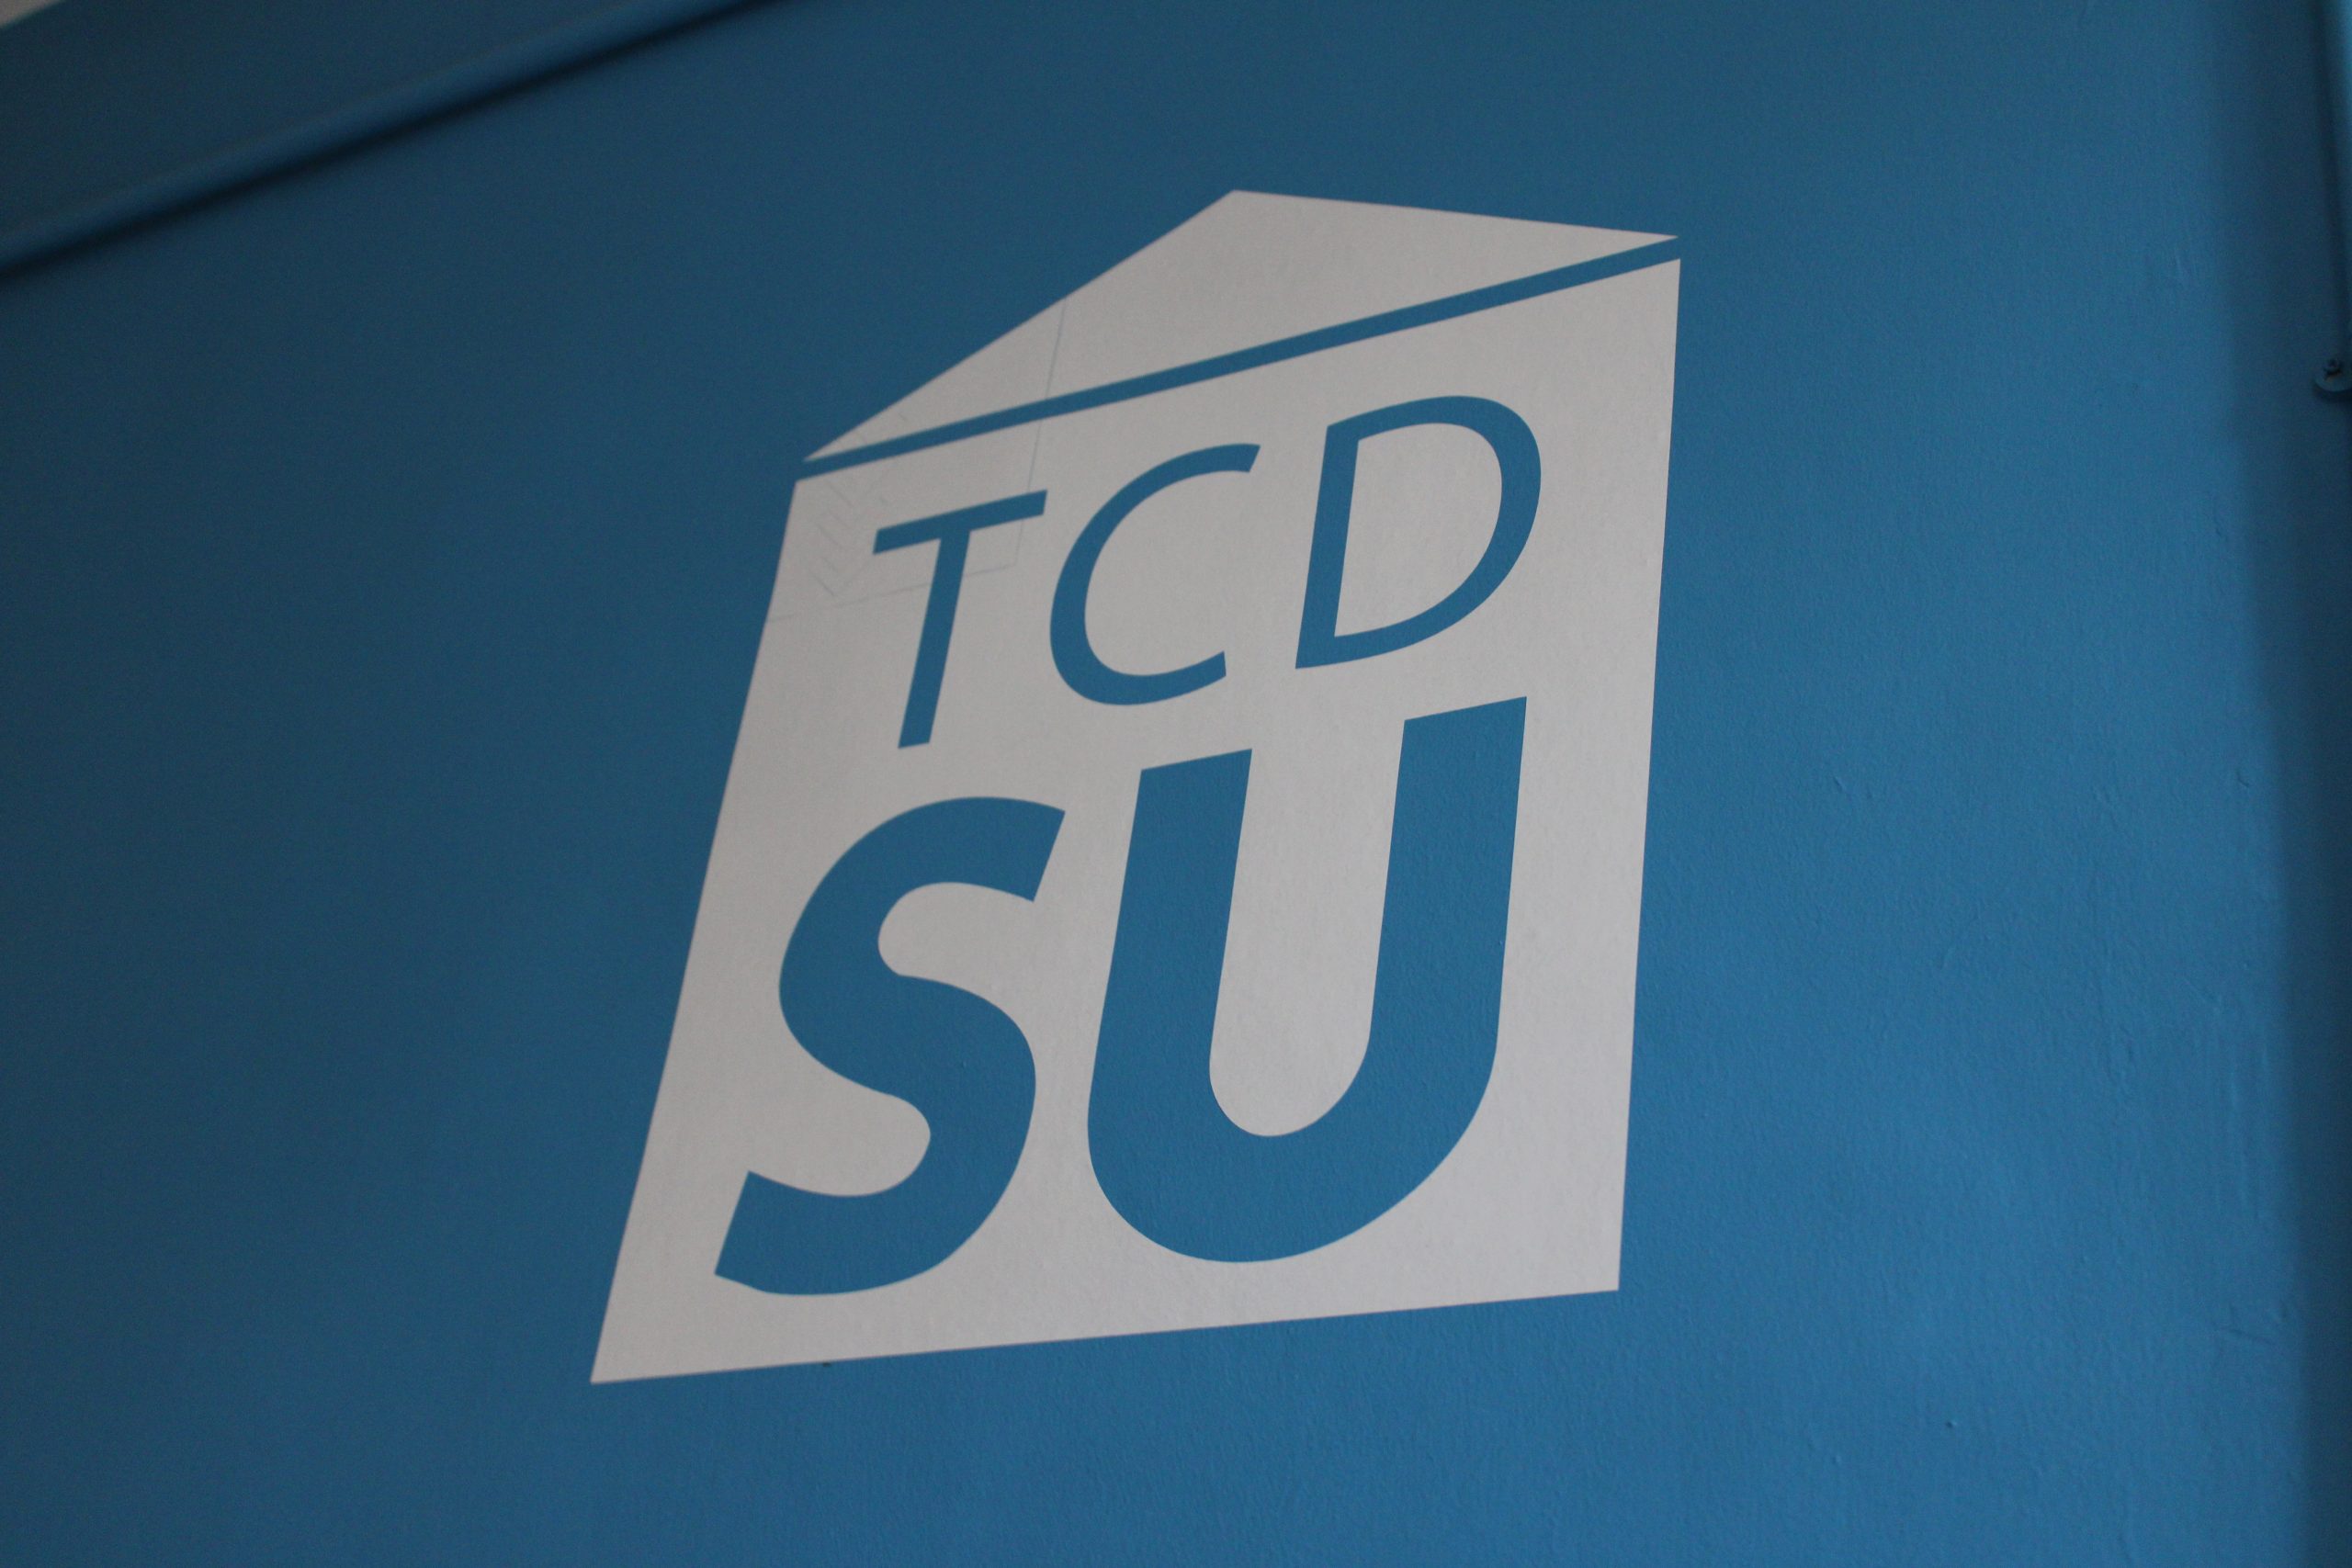 Analysis: The constitutional debate at the heart of TCDSU